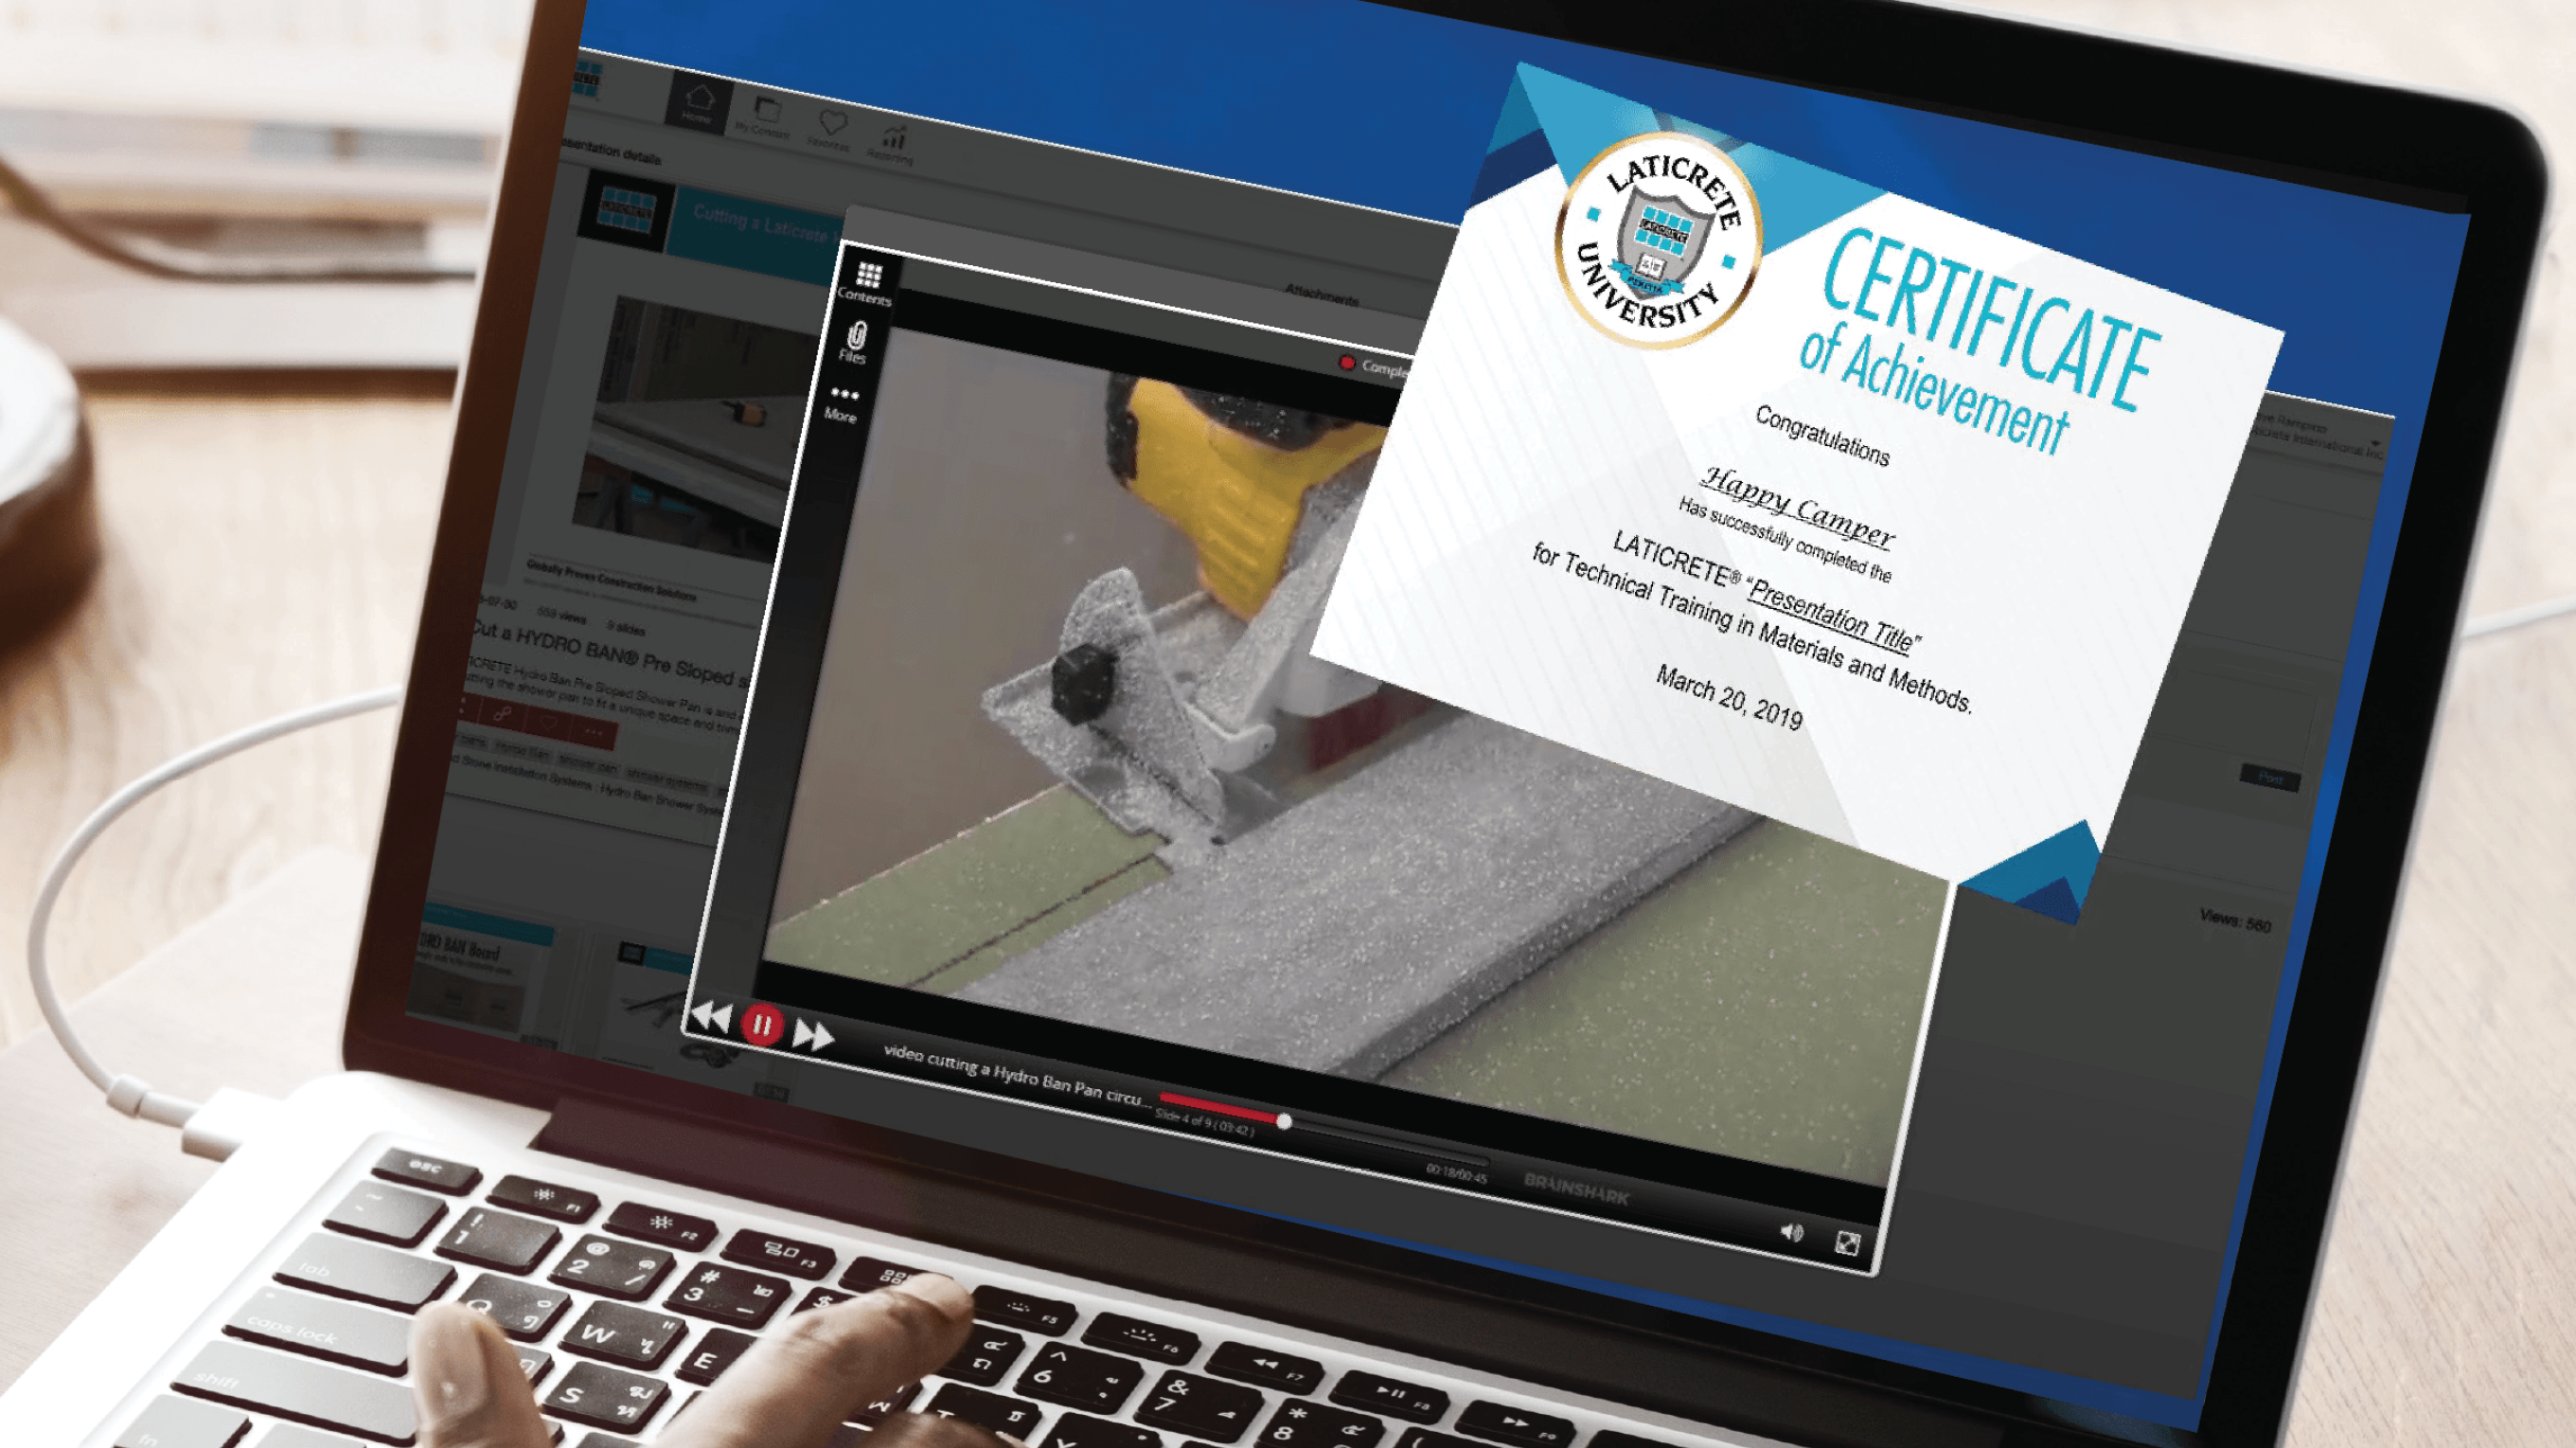 Learn more about concrete and substrate preparation through LATICRETE University tutorials